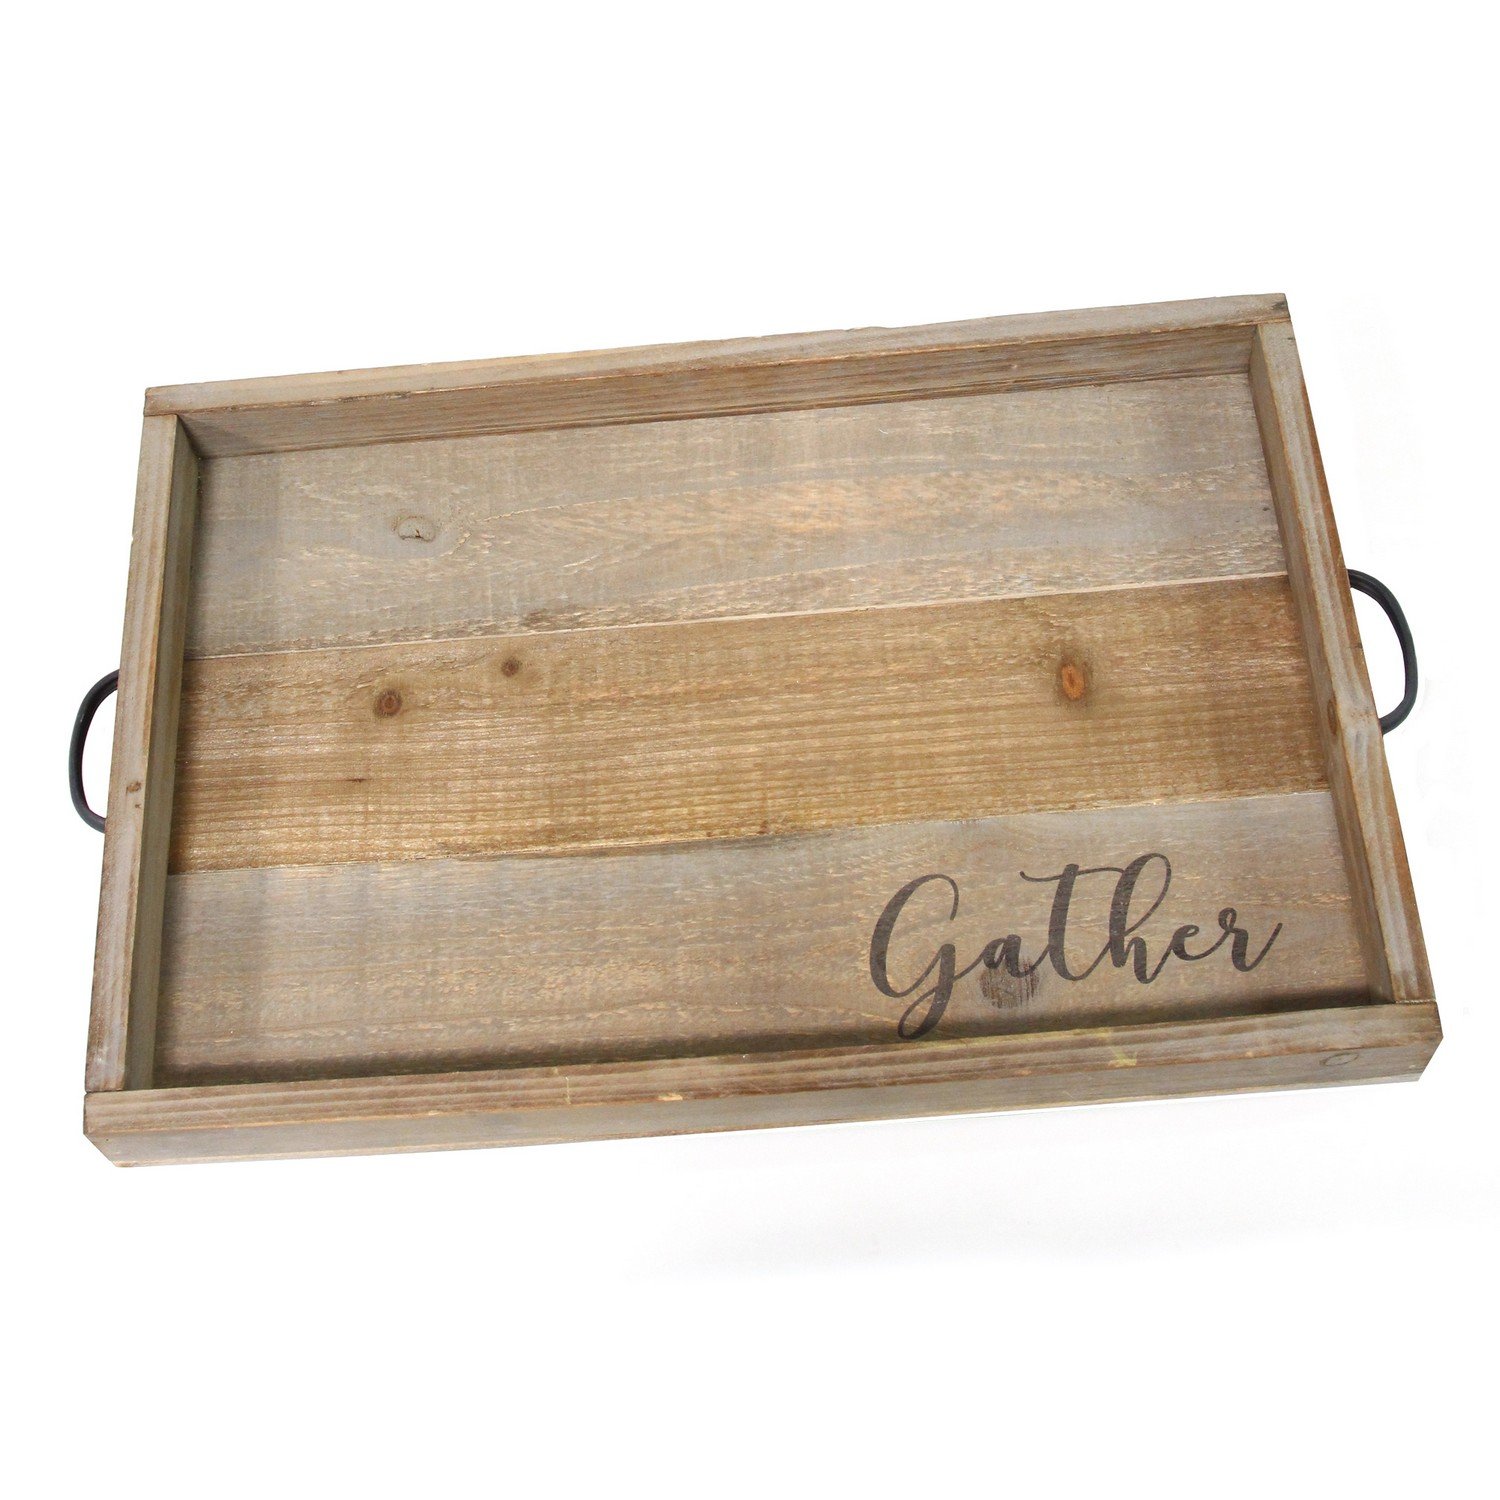 Handcrafted Distressed "Gather" Wood & Metal Tray